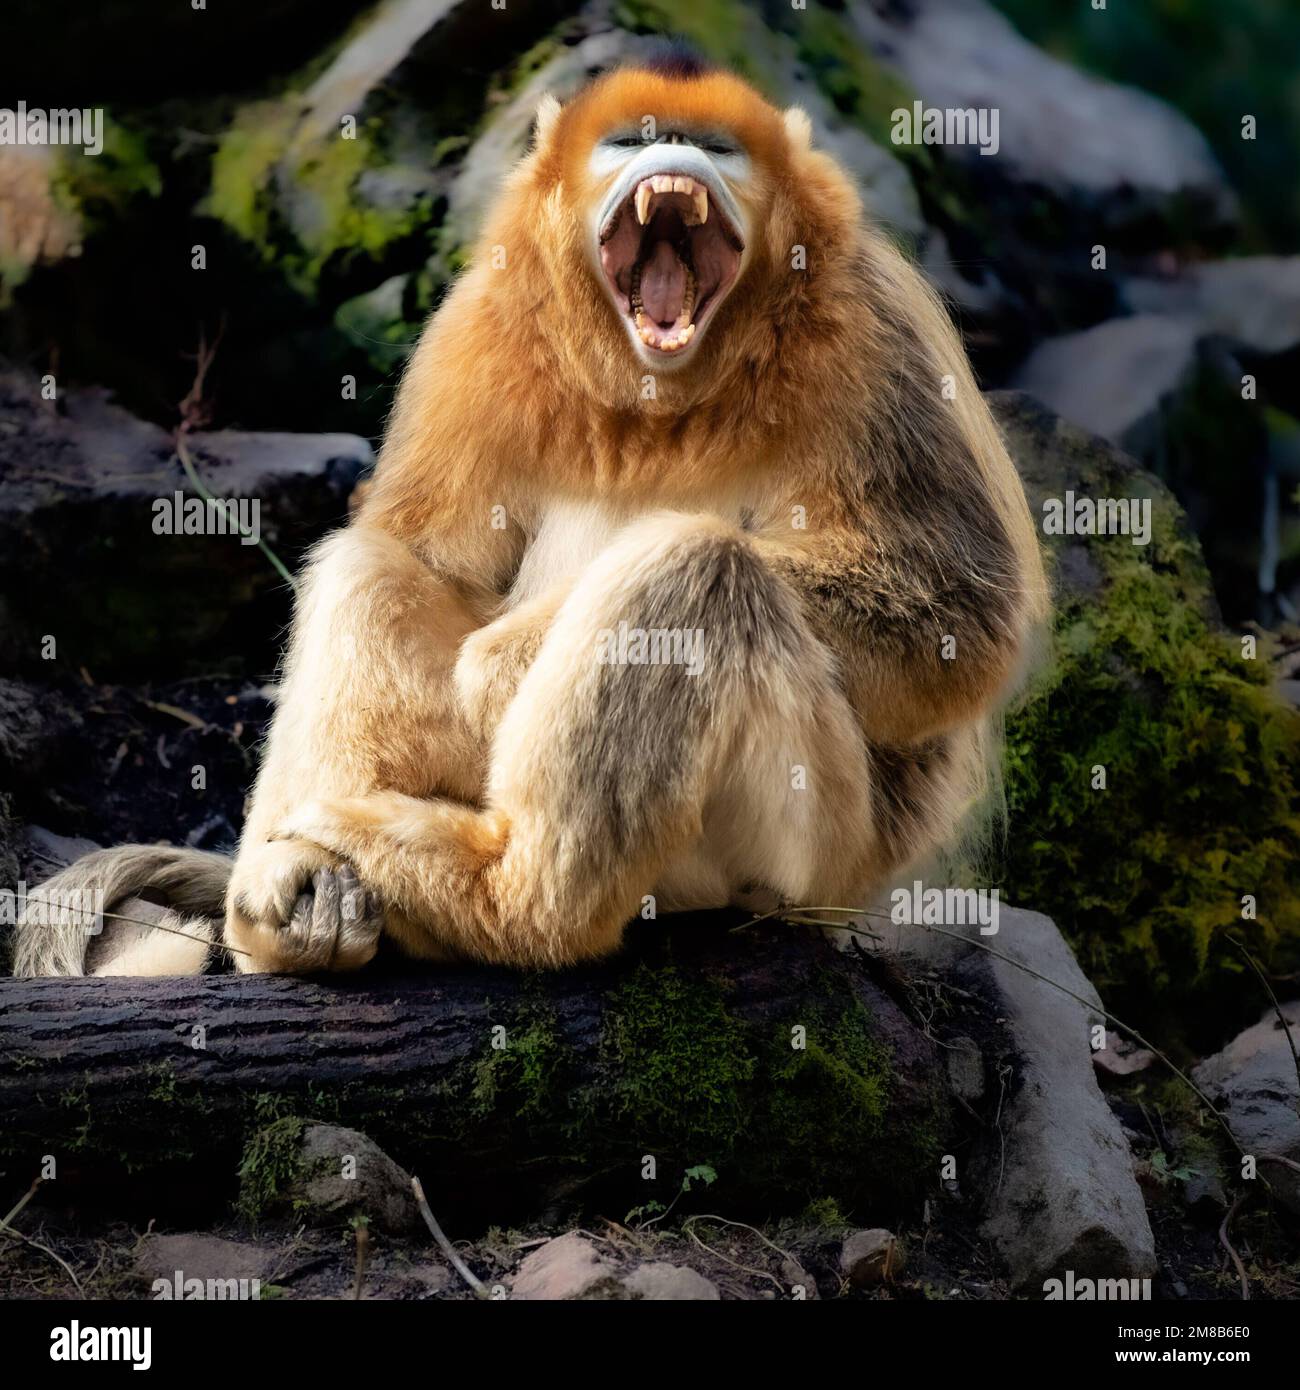 Bearing its teeth. China: THESE EXPRESSIVE images show wild snub-nosed monkey and their amazing range of emotions that have seen members of this speci Stock Photo